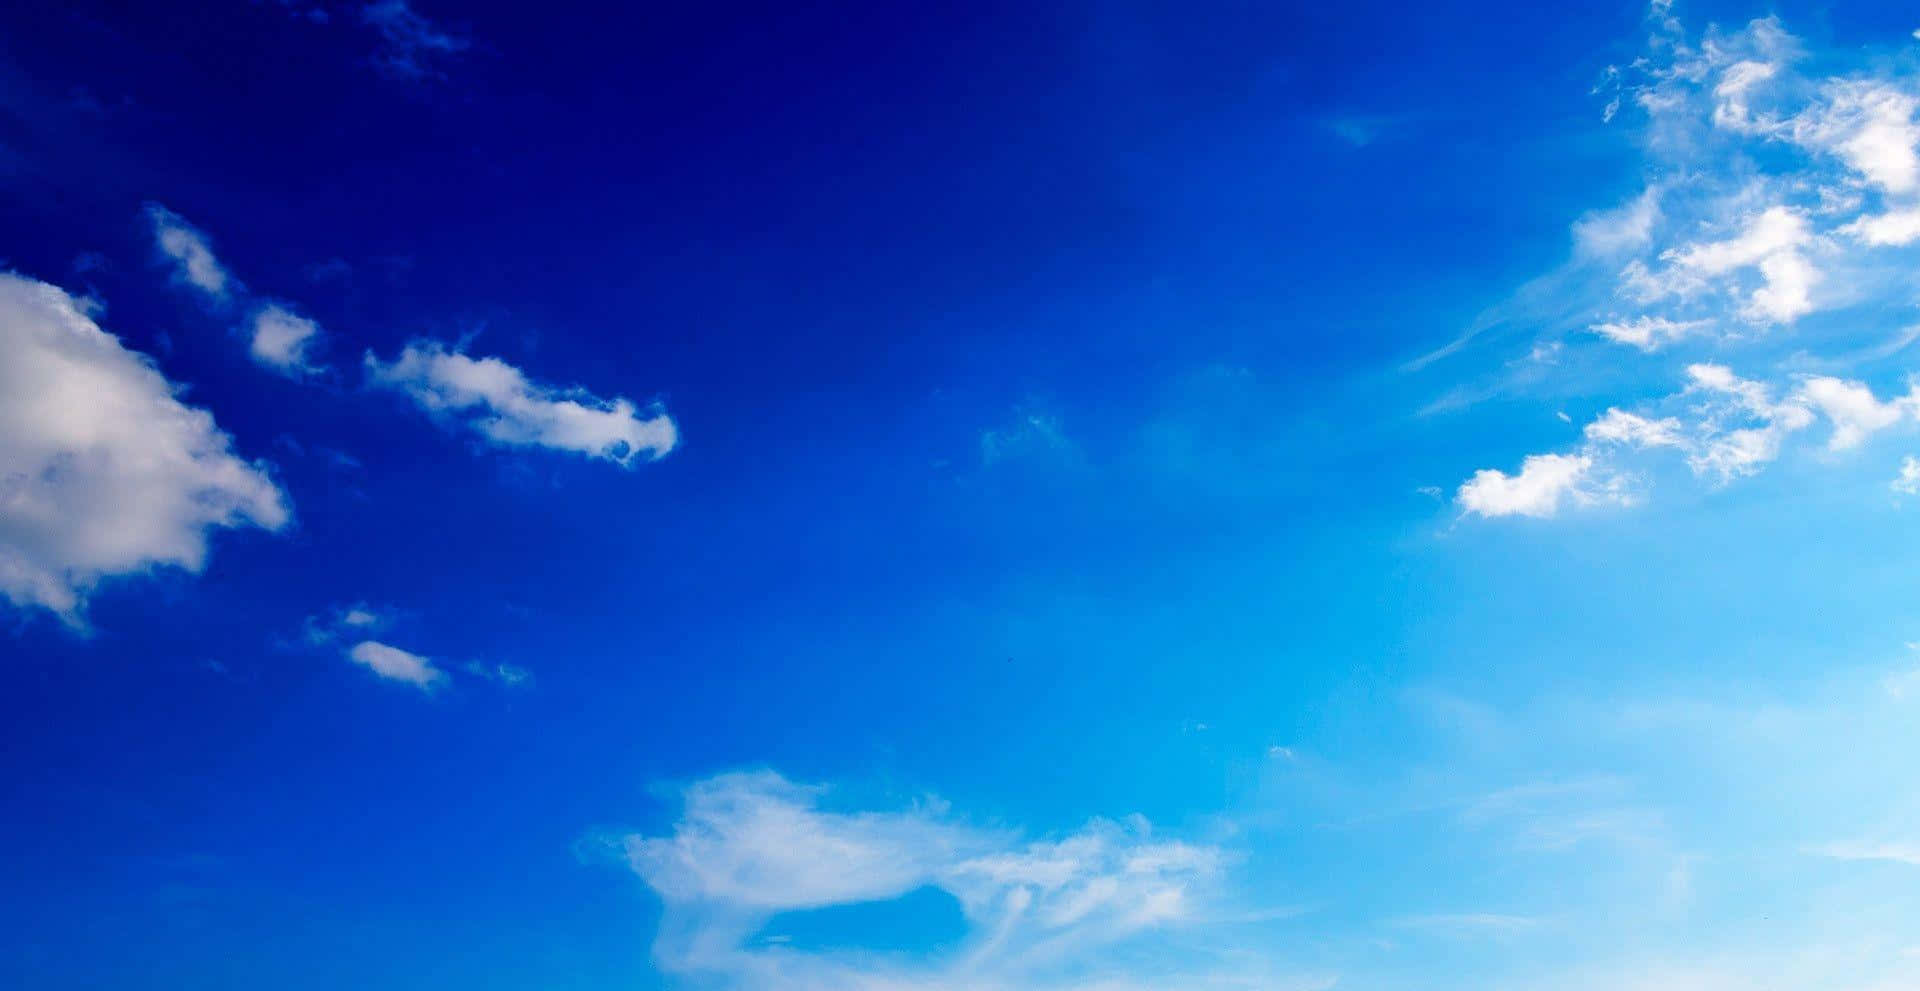 A breathtaking view of the deep blue sky